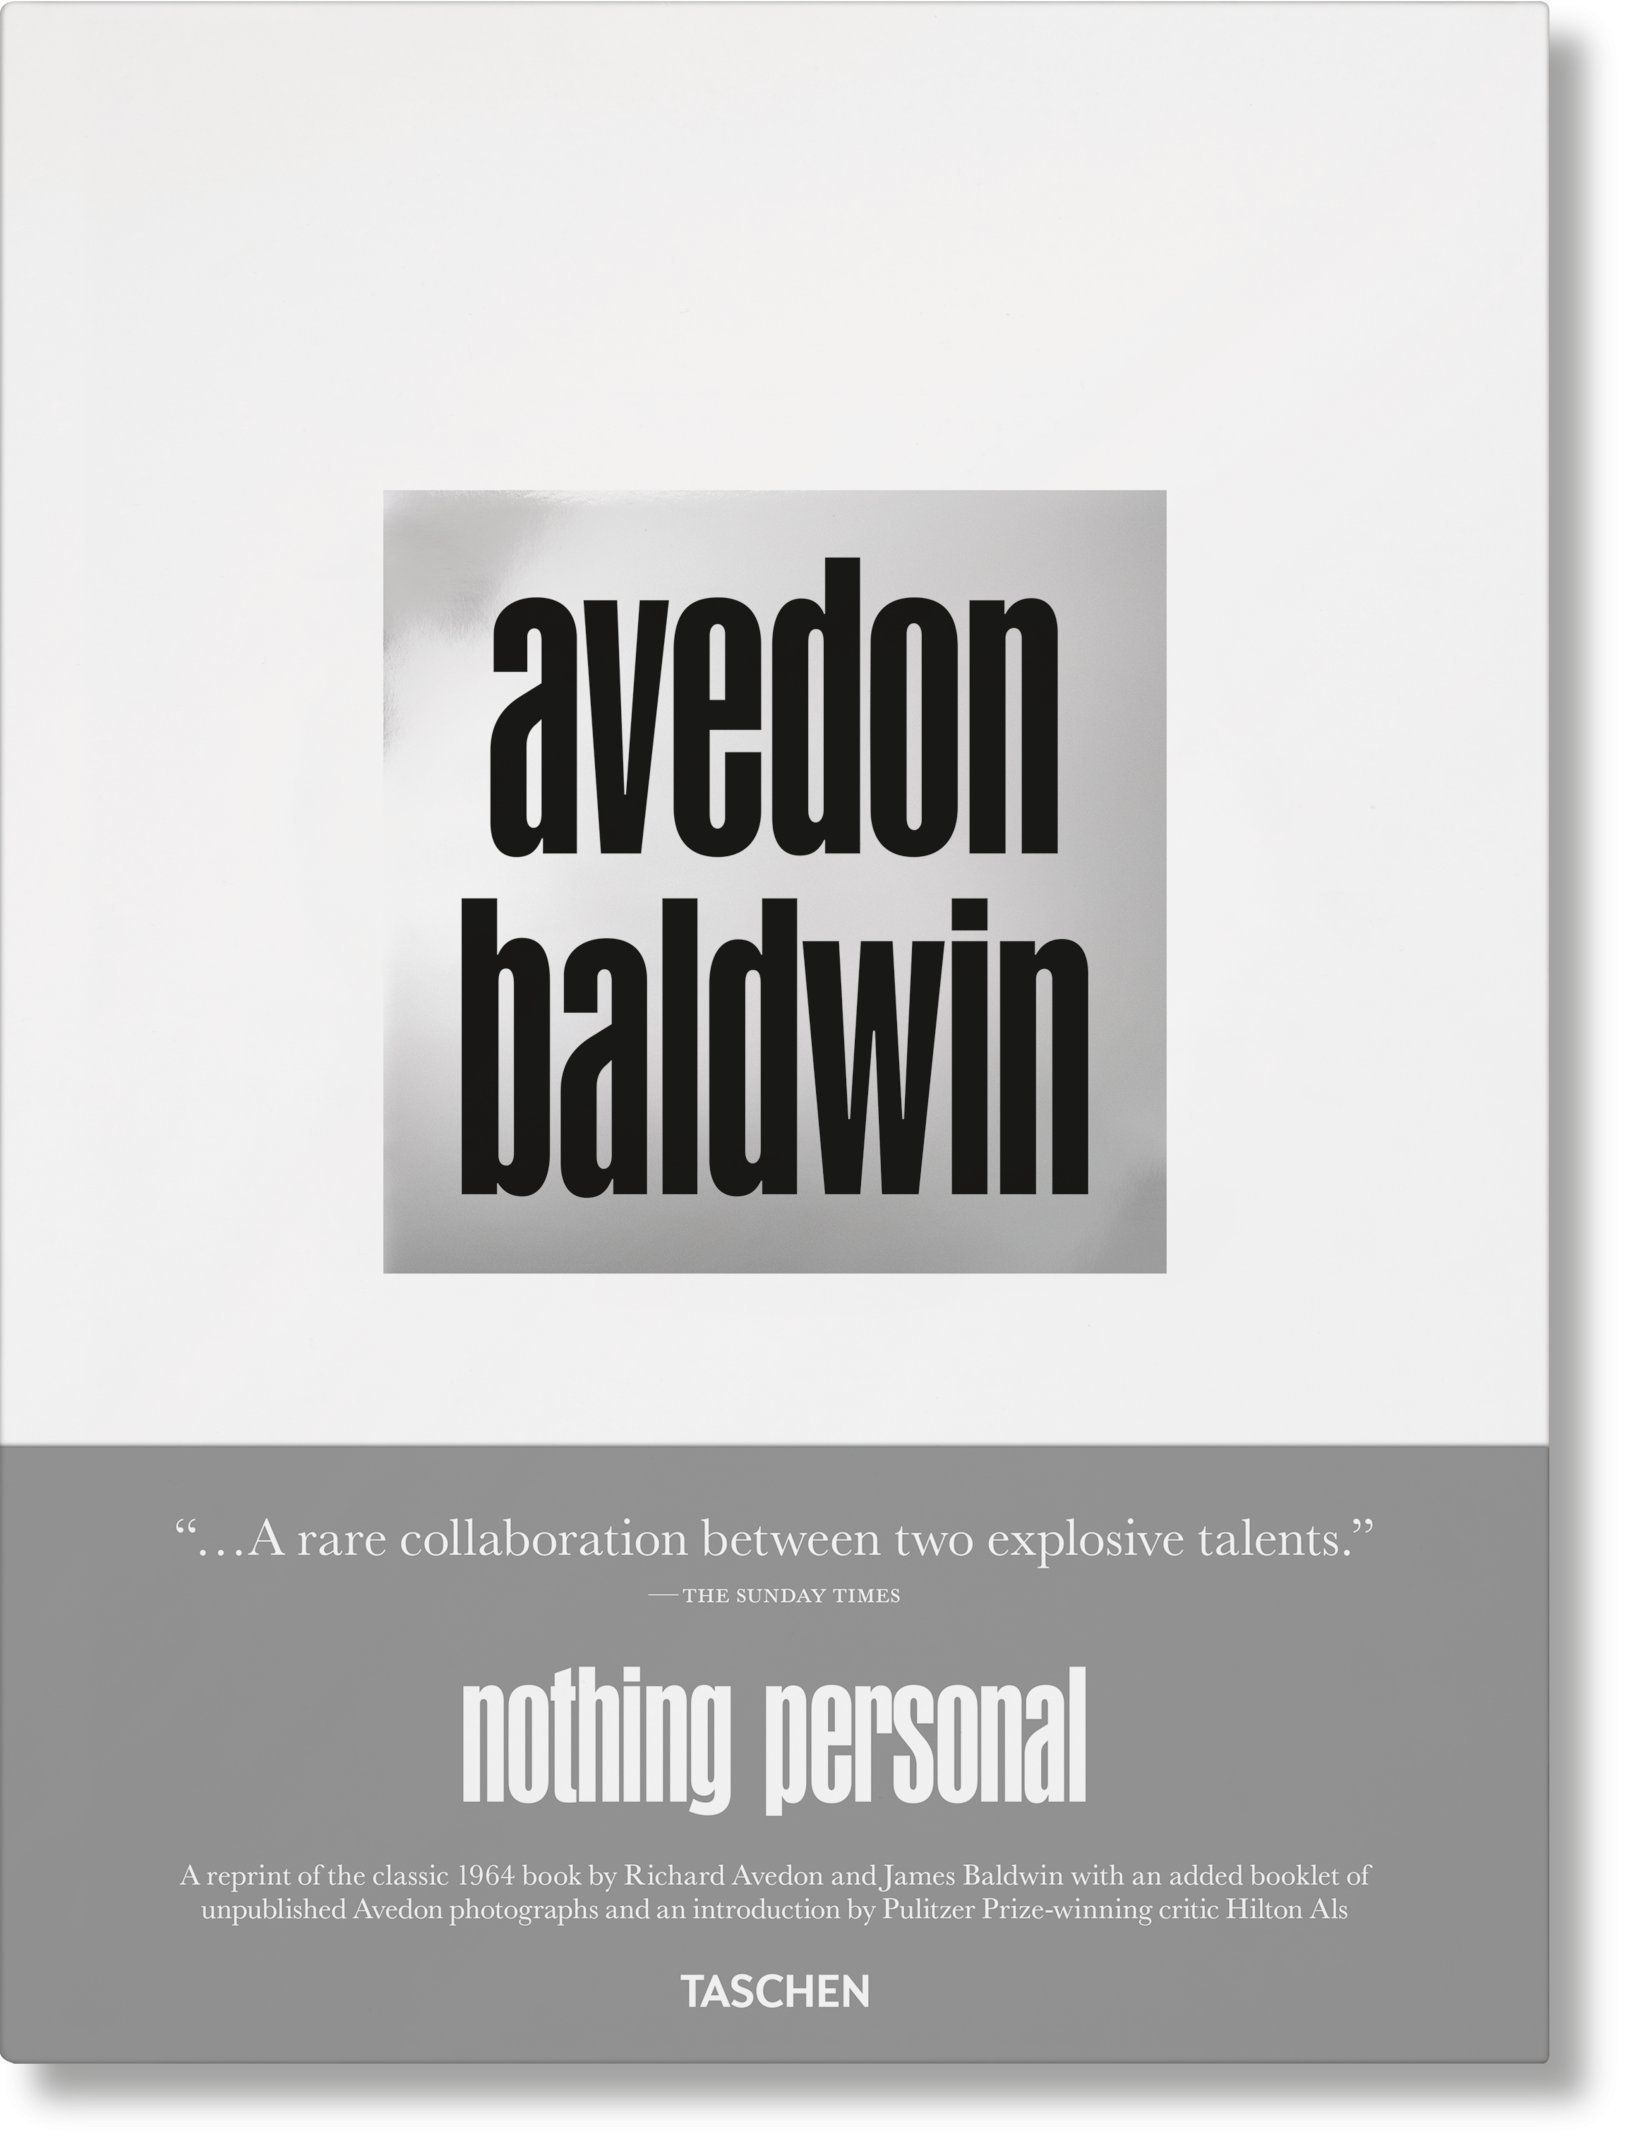 Everybody Knows His Name: James Baldwin and Richard Avedon’s “Nothing Personal”